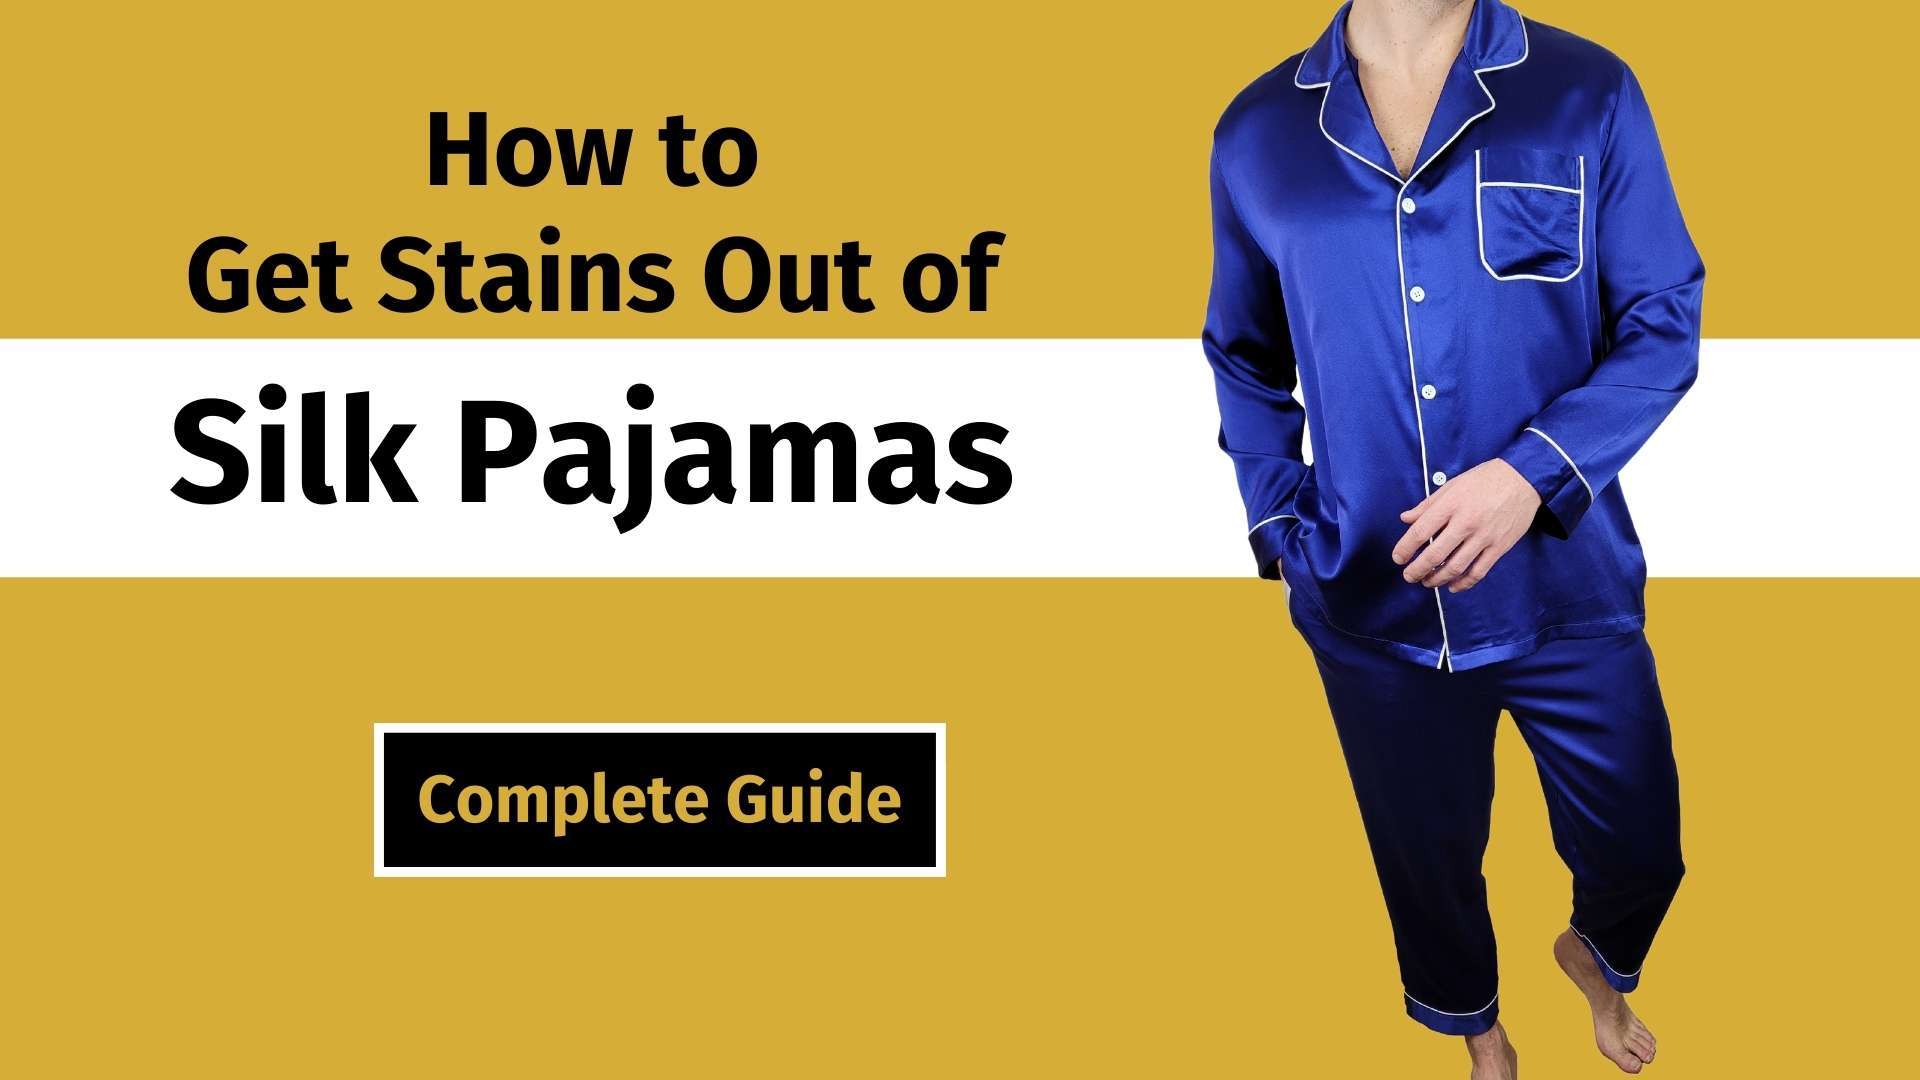 how to get stains out of silk pajamas banner image with a man wearing a pair of navy blue silk pajamas